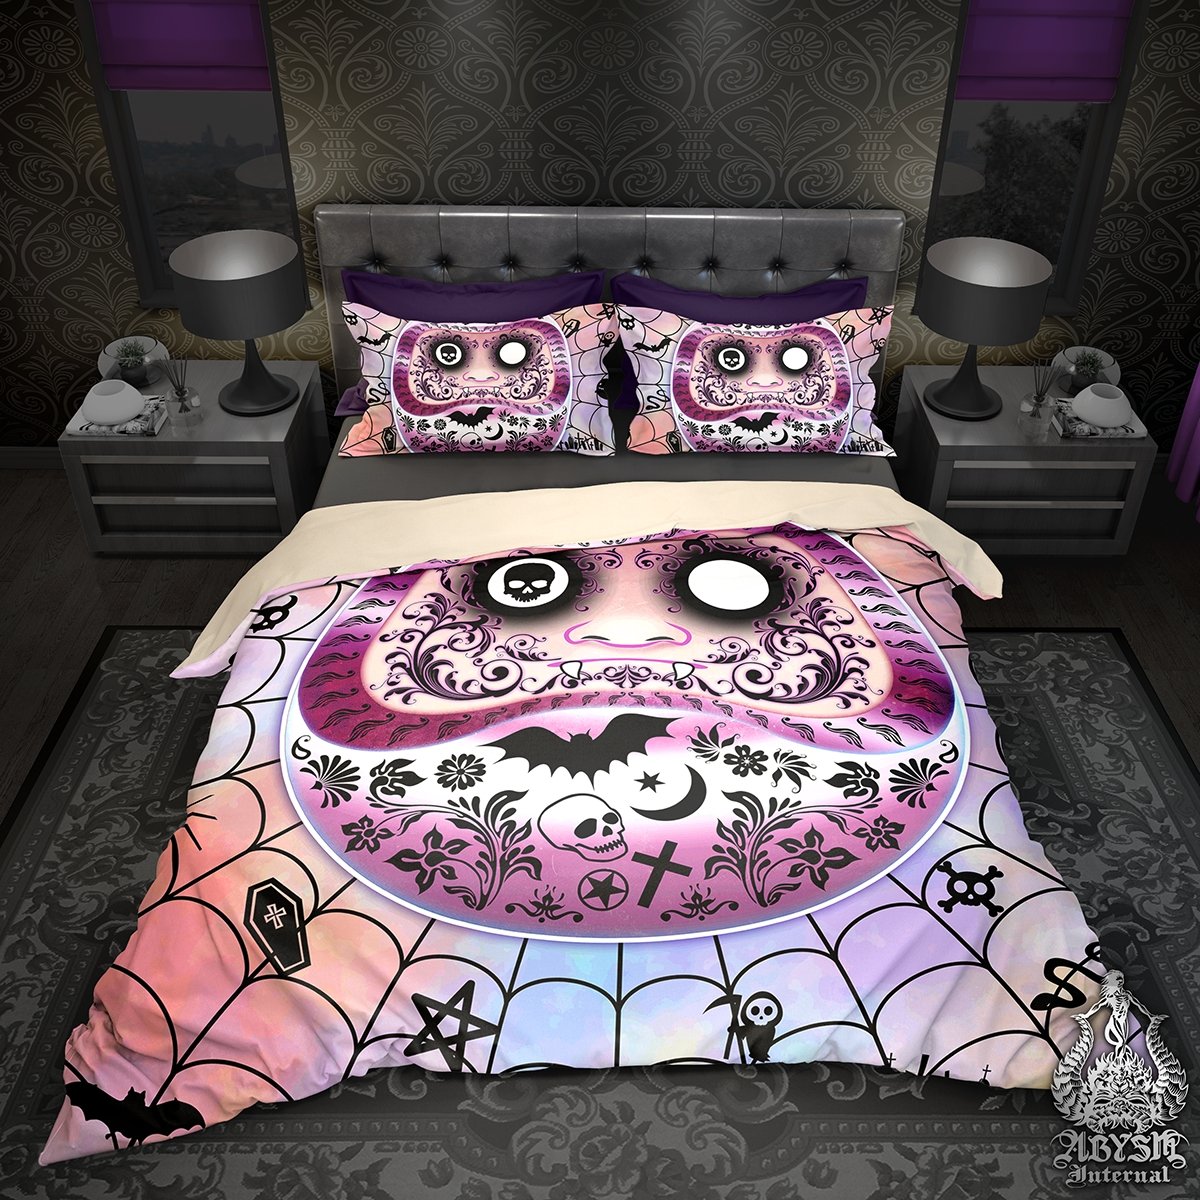 Daruma Bedding Set, Comforter and Duvet, Funny Japanese Pastel Goth Cover and Bedroom Decor, King, Queen and Twin Size - Art - Abysm Internal